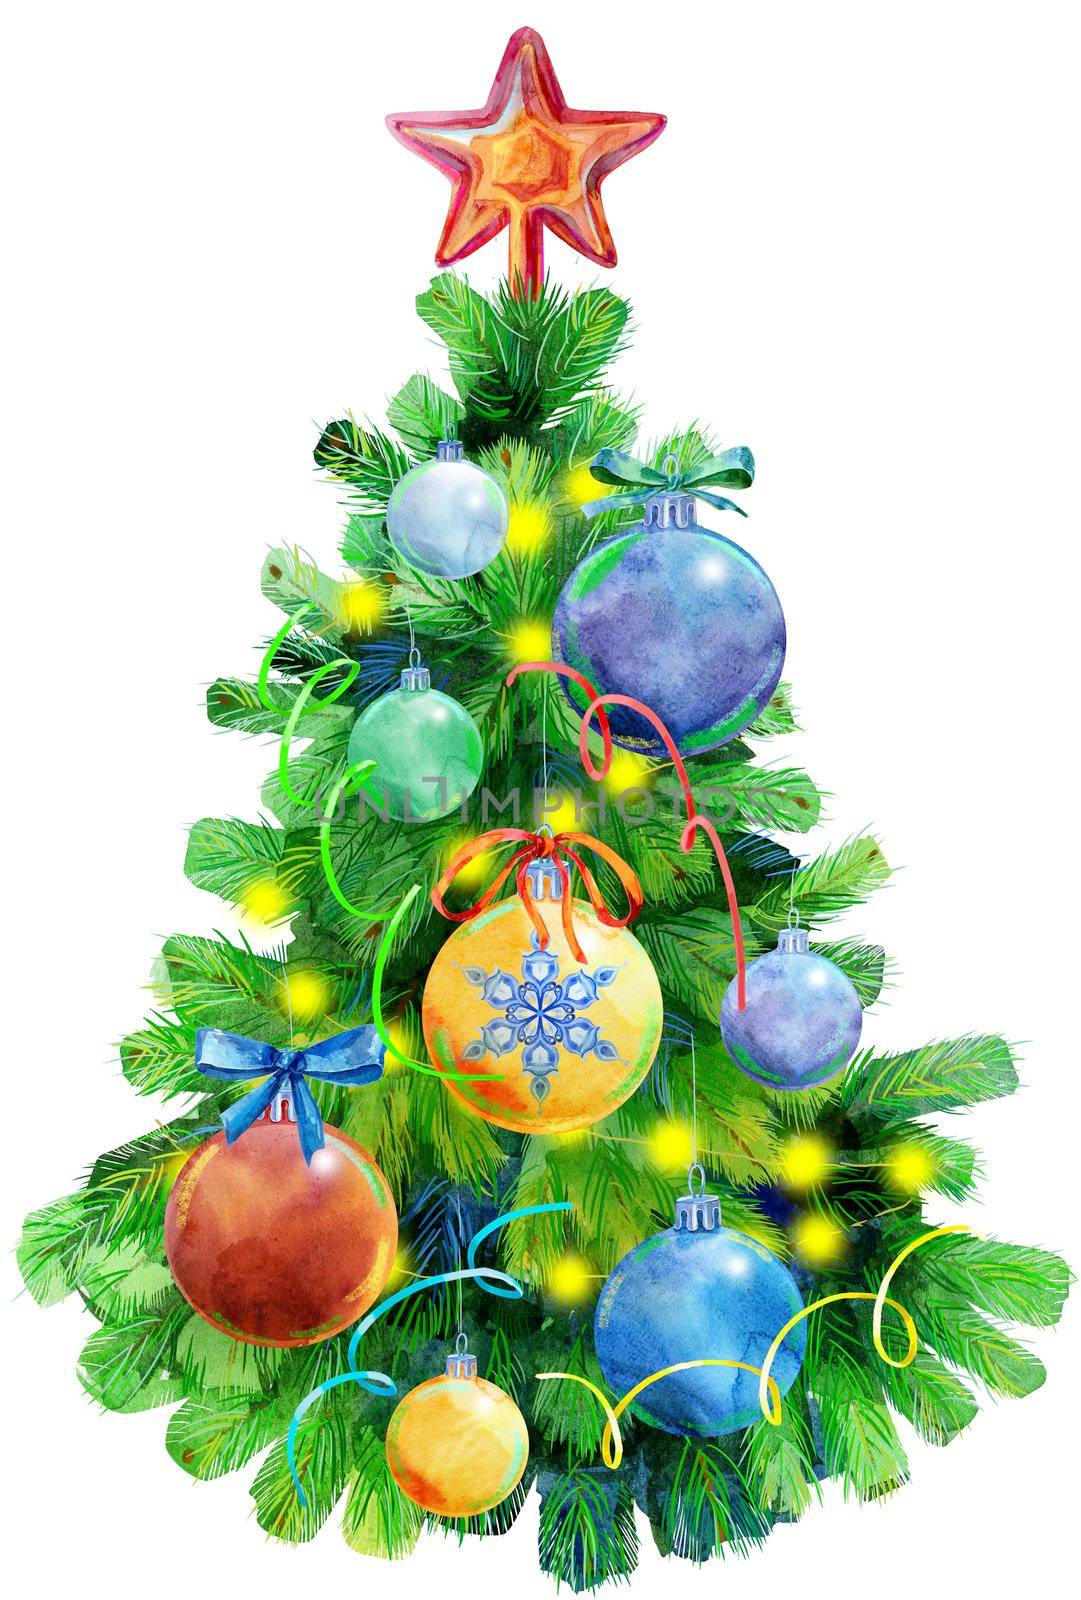 Watercolor illustration Christmas tree decorated with Christmas balls. by NataOmsk